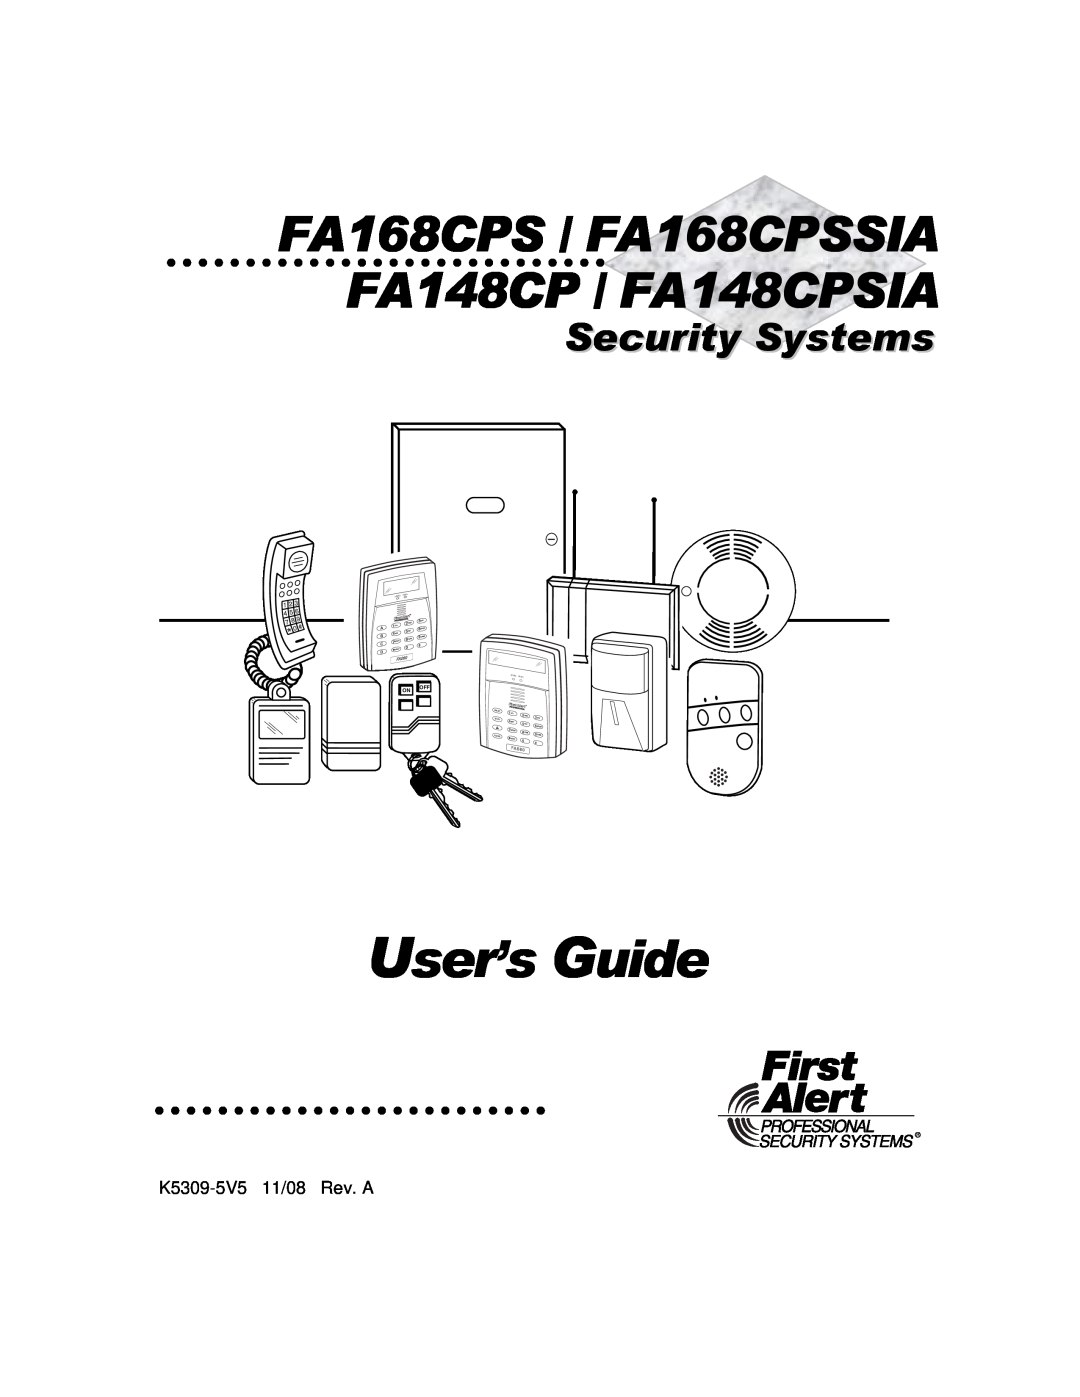 Garmin manual 1OFFMAX, Away, 5TEST, 8CODE, 9CHIME, FA168CPS / FA168CPSSIA FA148CP / FA148CPSIA, Security Systems, 3STAY 